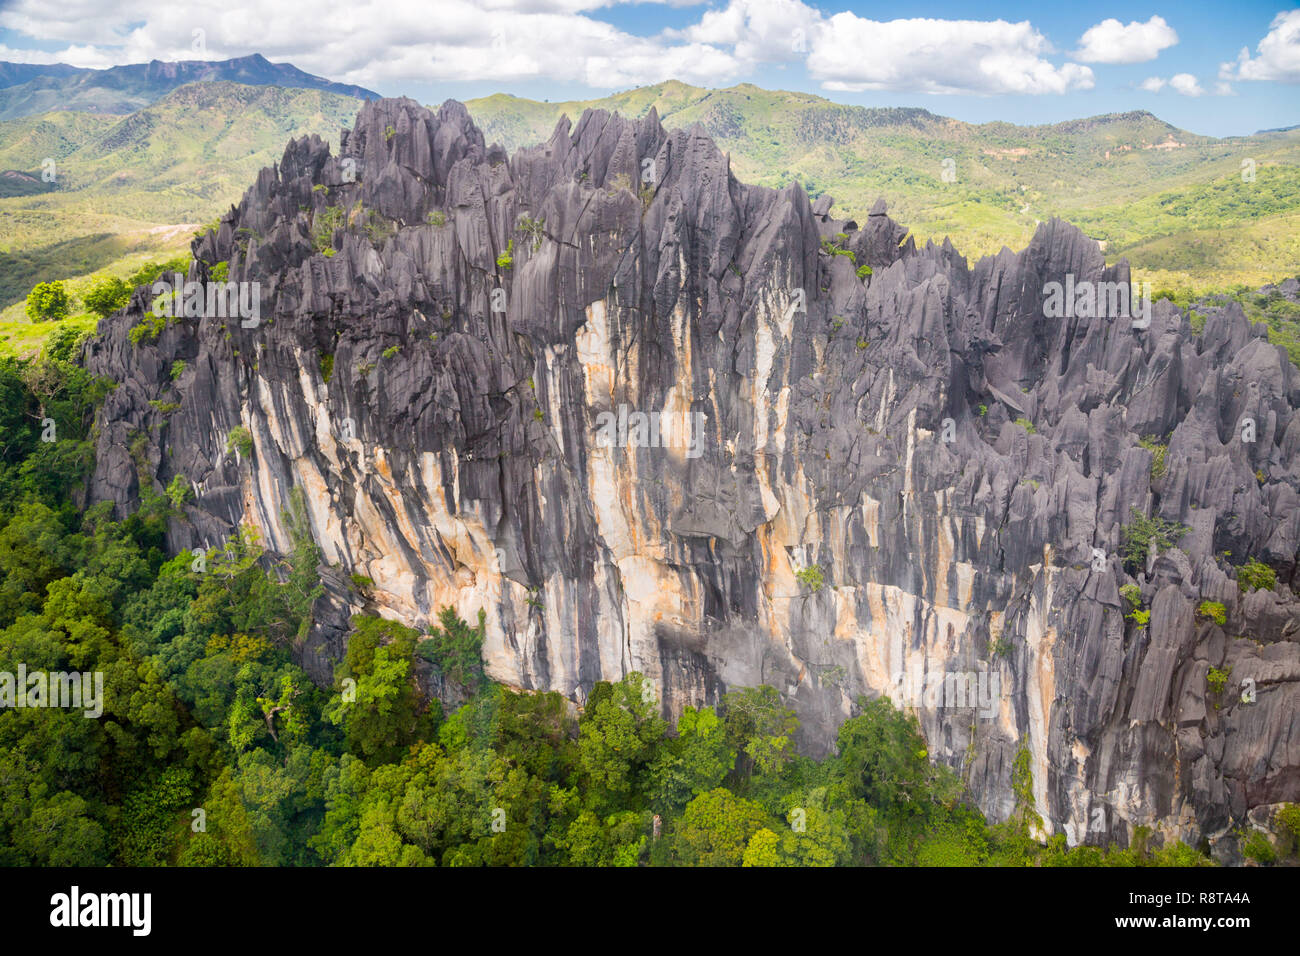 Sharp needles of black volcanic peaks. Mountains near Mont Aoupinie and Poya river, aerial view. North Province, New Caledonia, Micronesia, Oceania. Stock Photo